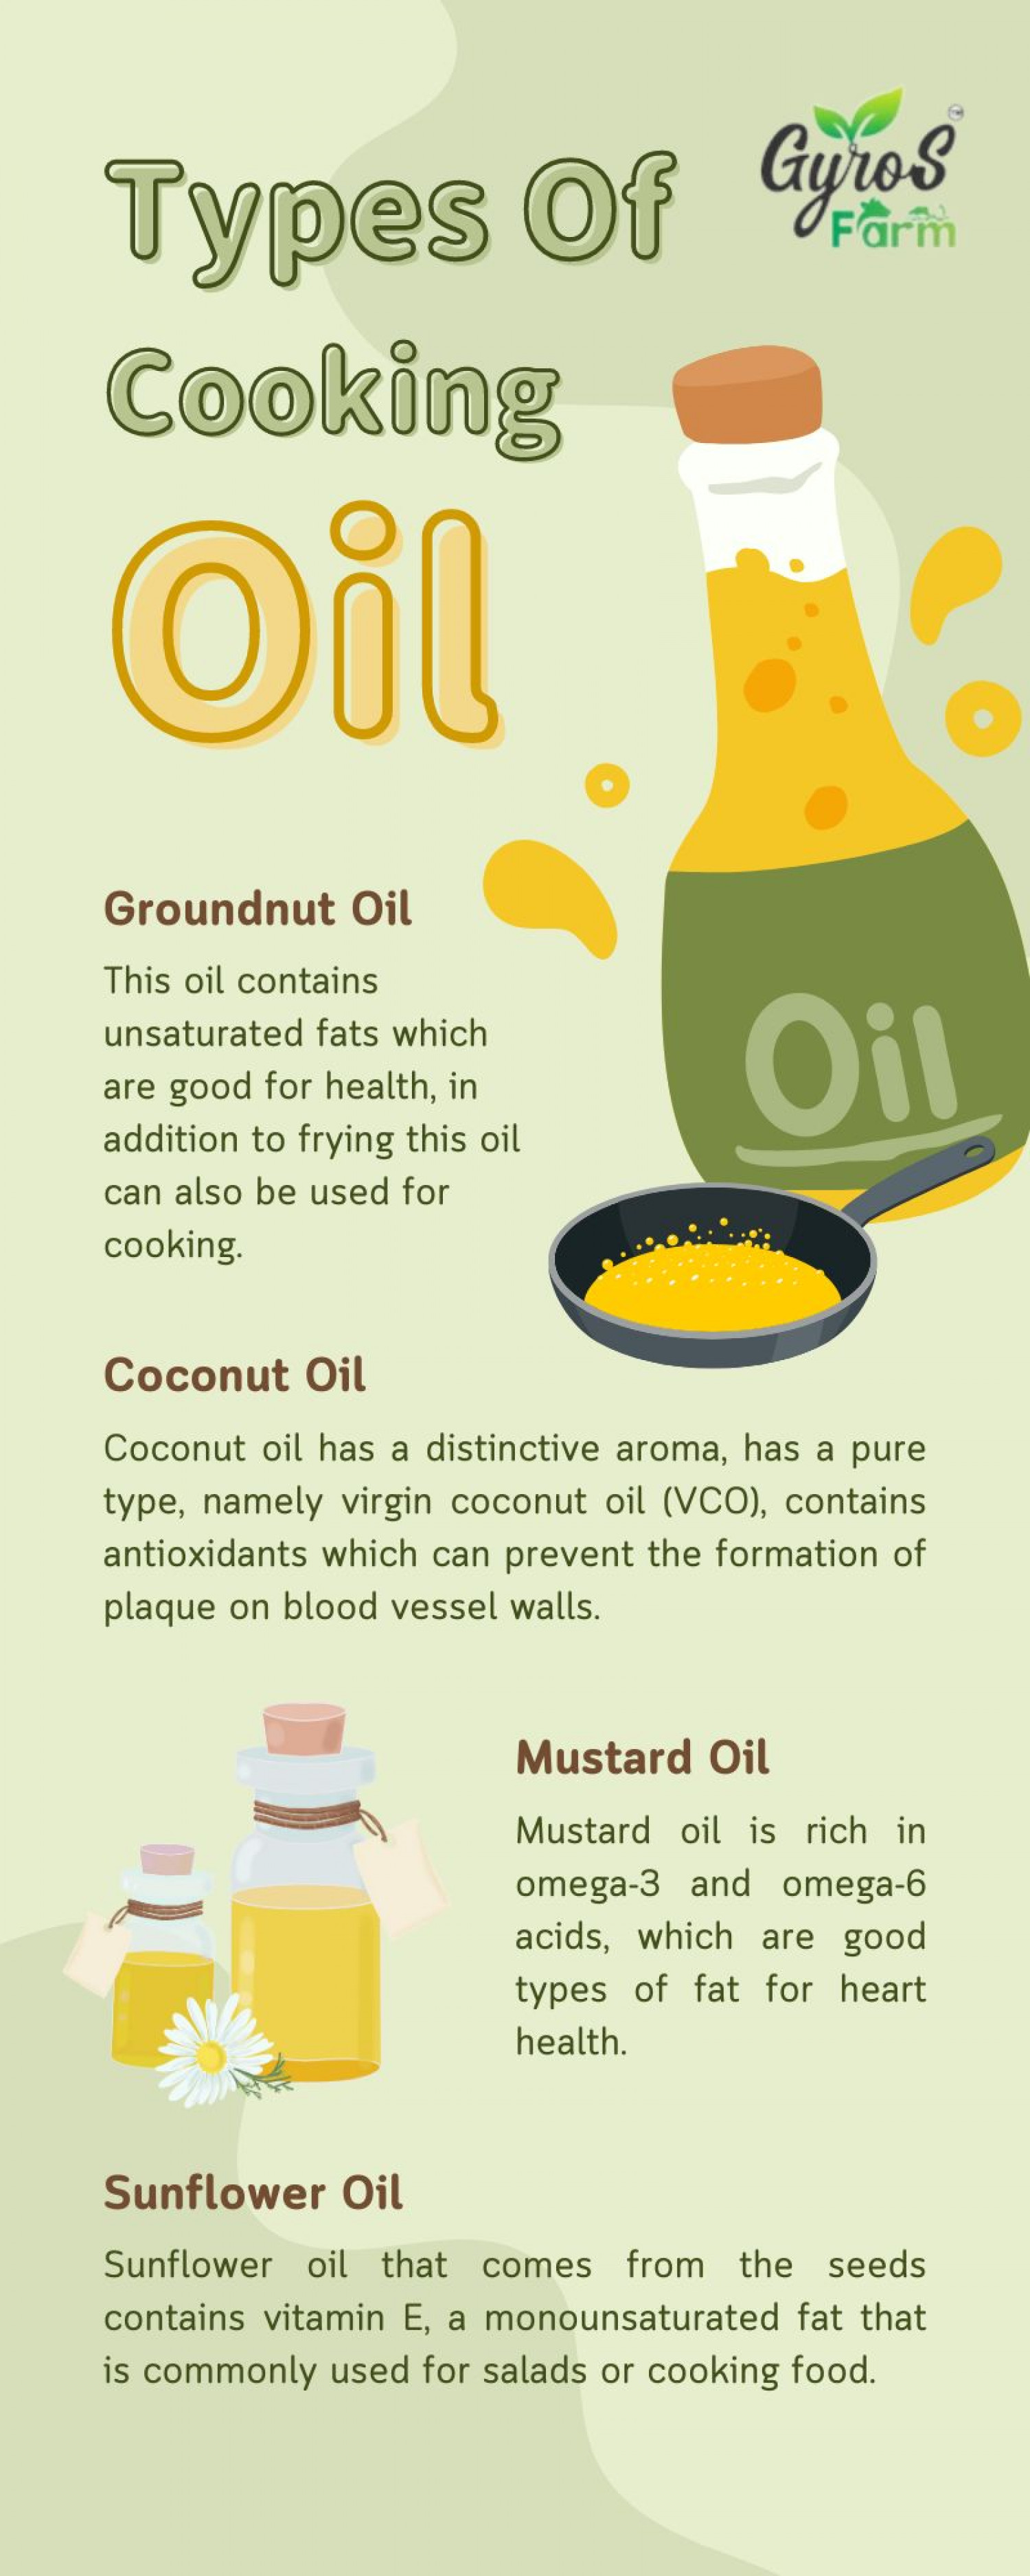 Types Of Cooking oil : Gyros Infographic